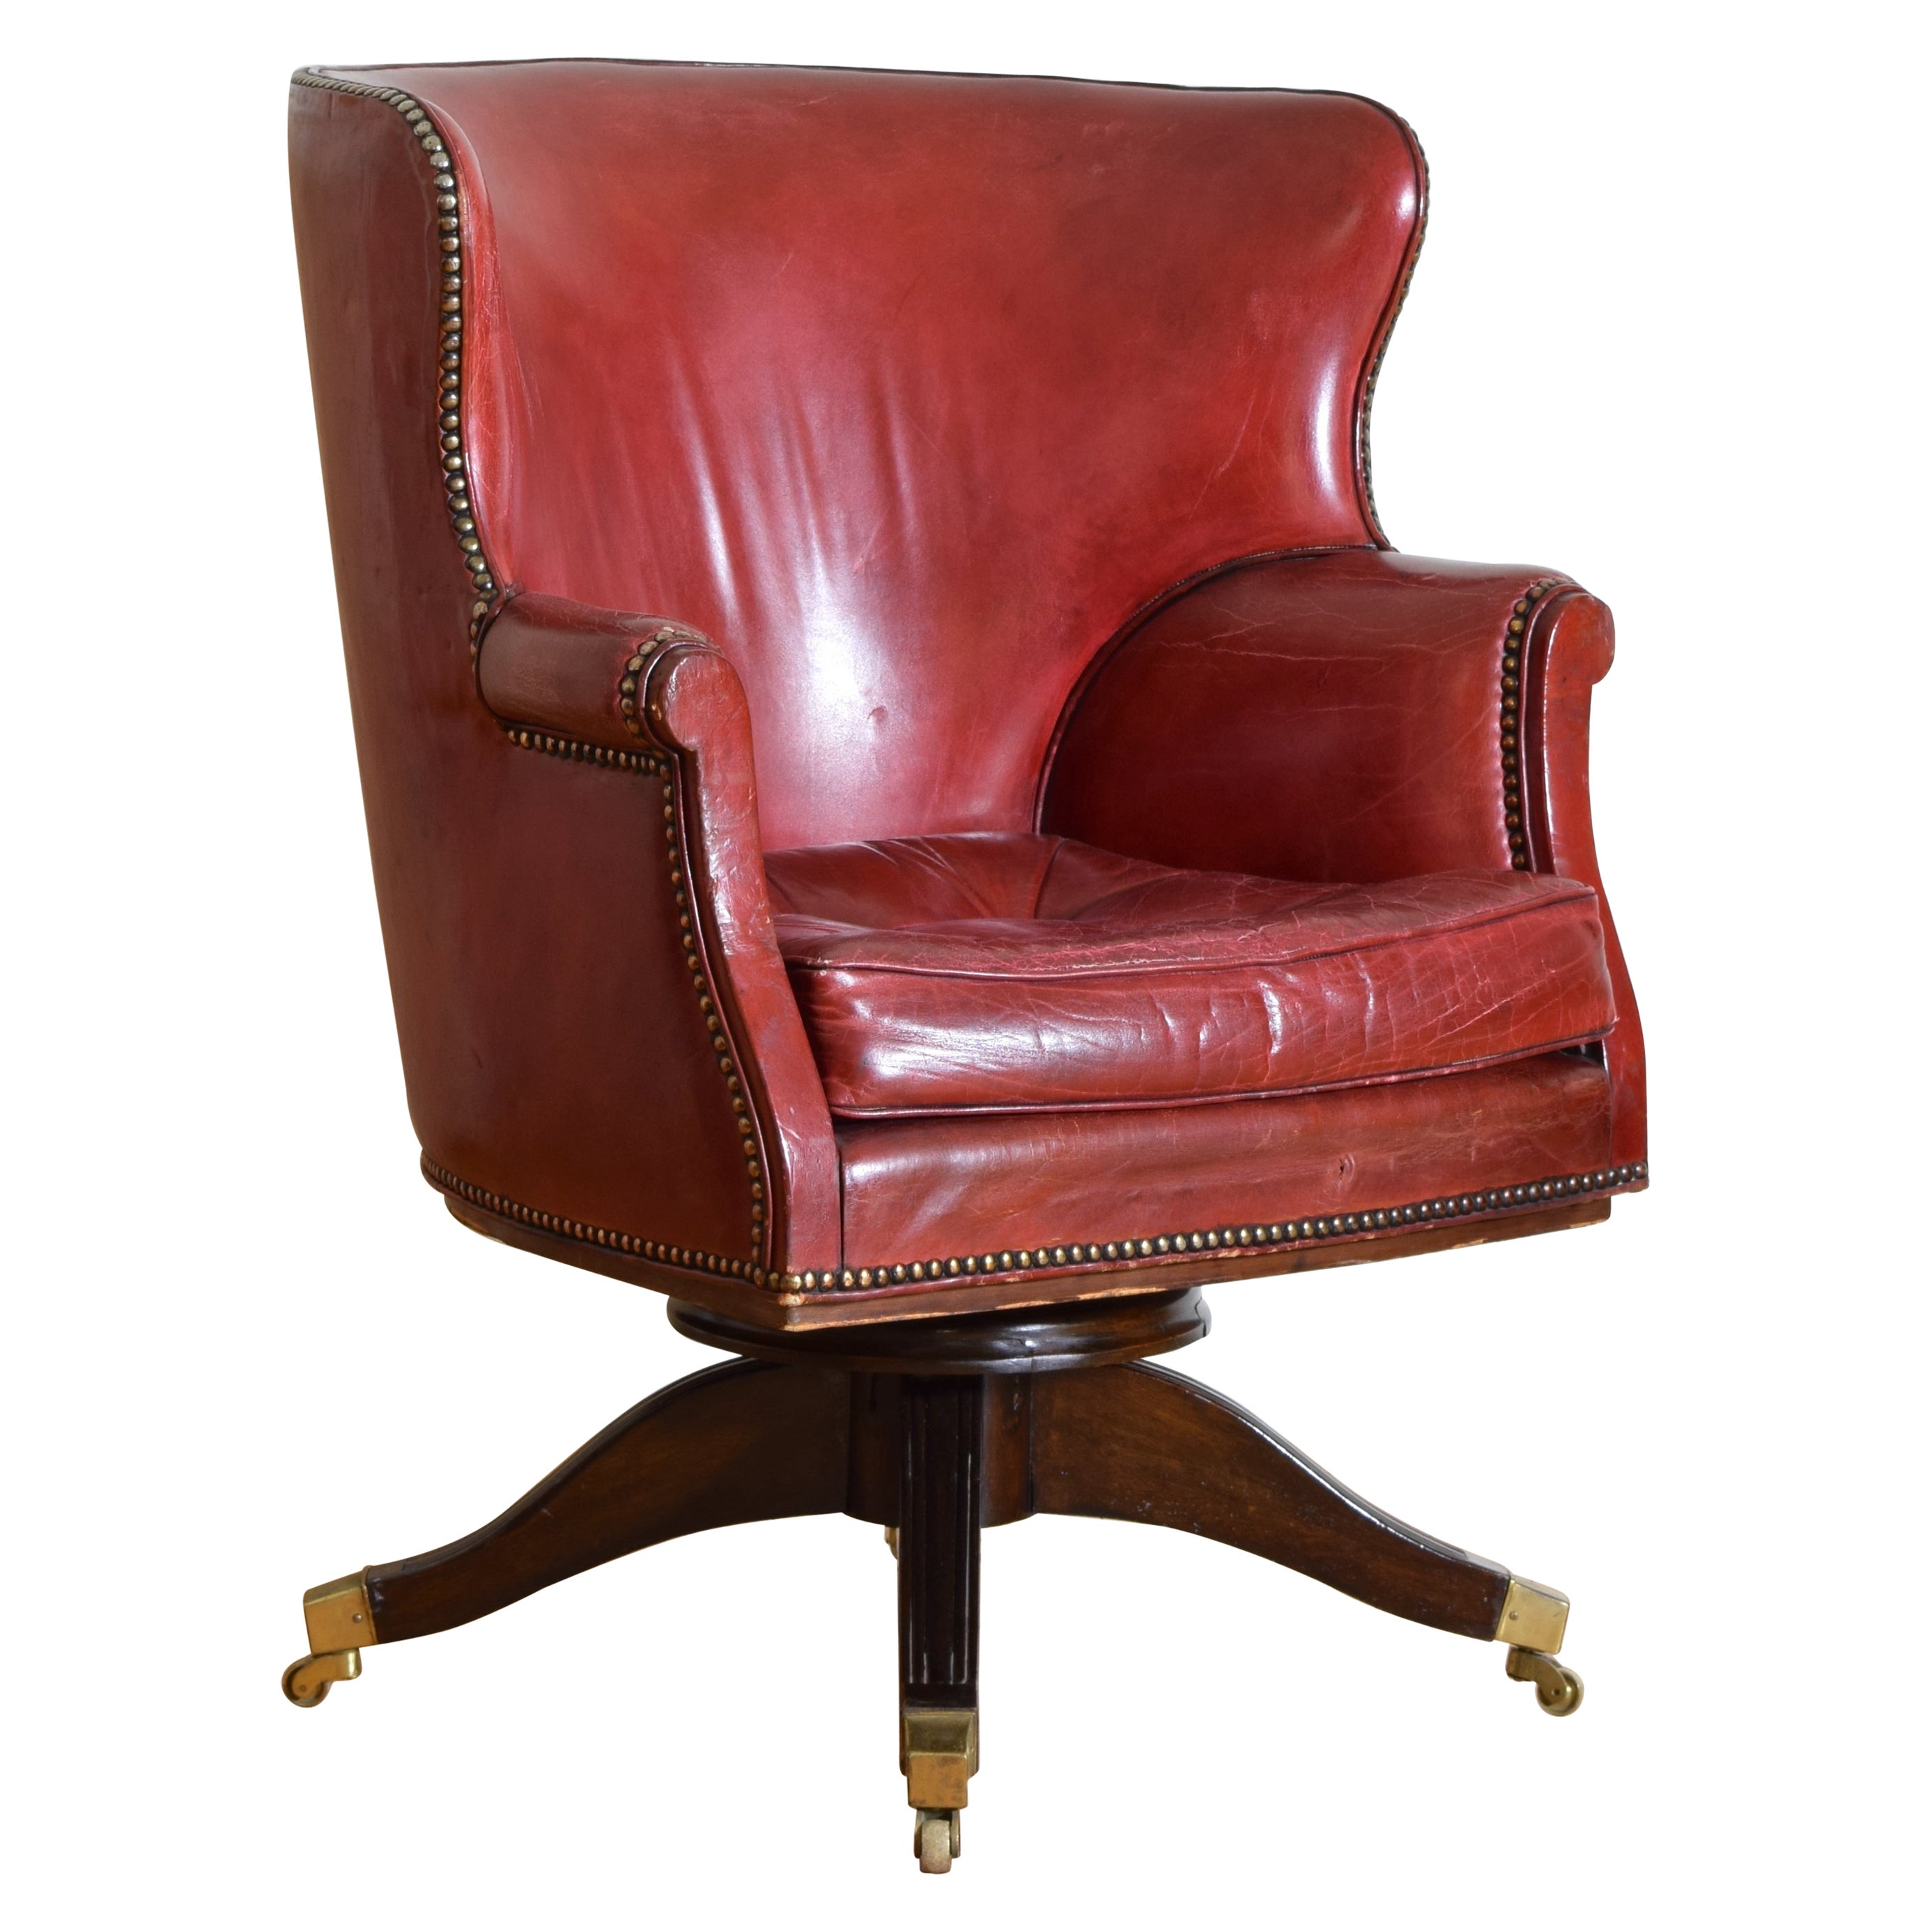 English Georgian Style Mahogany & Leather Upholstered Swivel Wing Chair